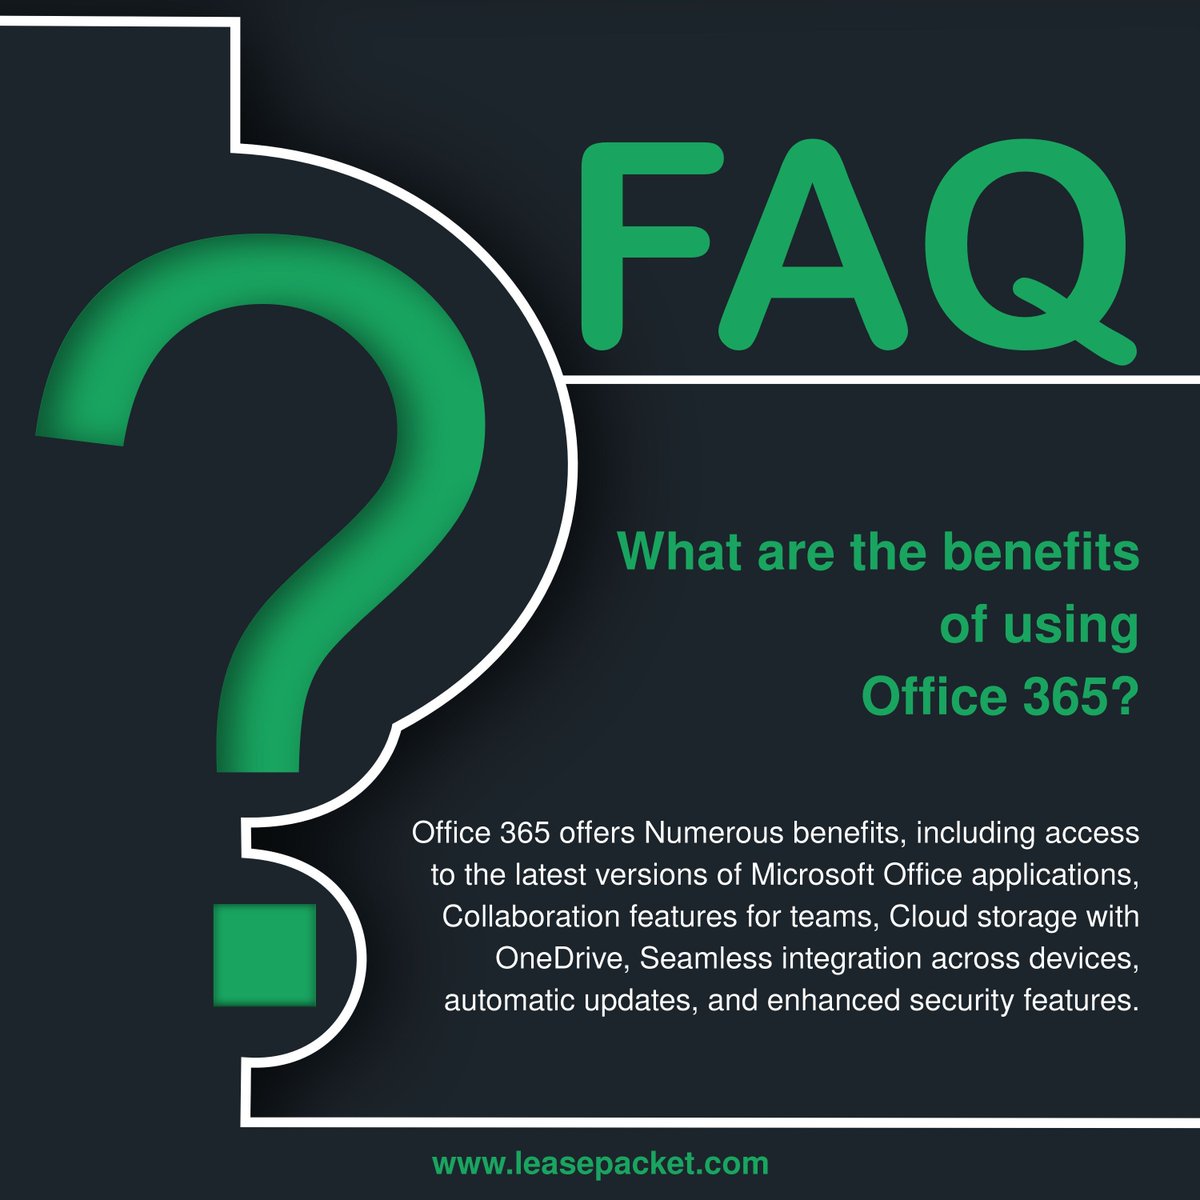 Why choose 365 with Lease Packet? Enjoy unparalleled uptime, enhanced security, and seamless collaboration tools that keep your business operating smoothly all year round.
#office365 #microsoft365 #emailserver #serverprovider #serversolutions #leasepacket #faqs #serversupport